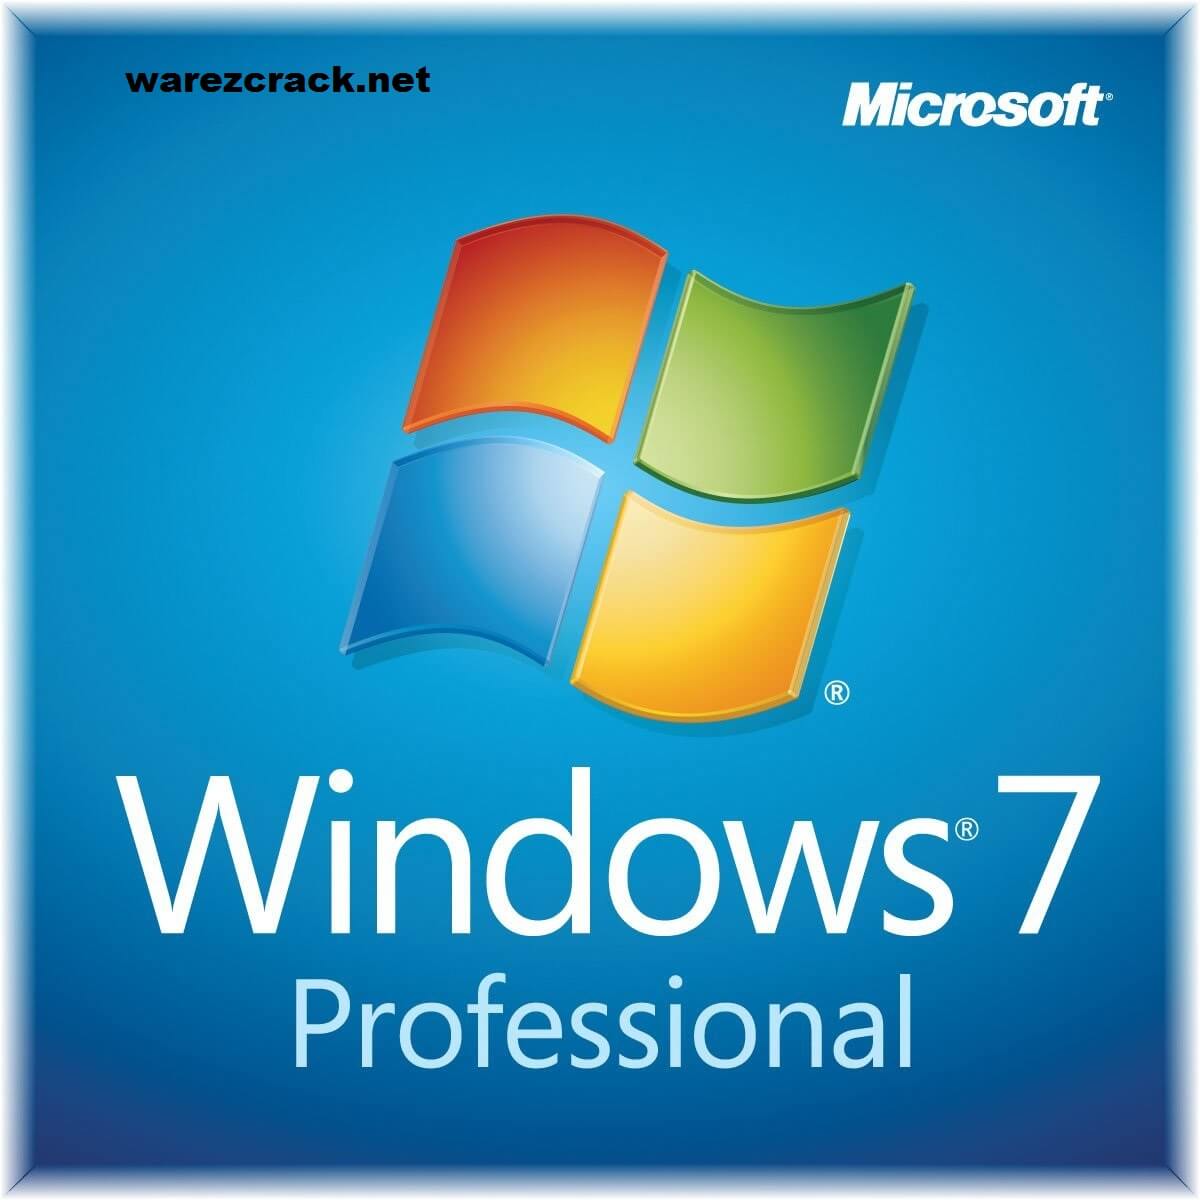 Free Download Crack !!TOP!! For Windows 7 Ultimate Build 7600 Windows-7-Professional-Serial-key-incl-Product-Key-Free